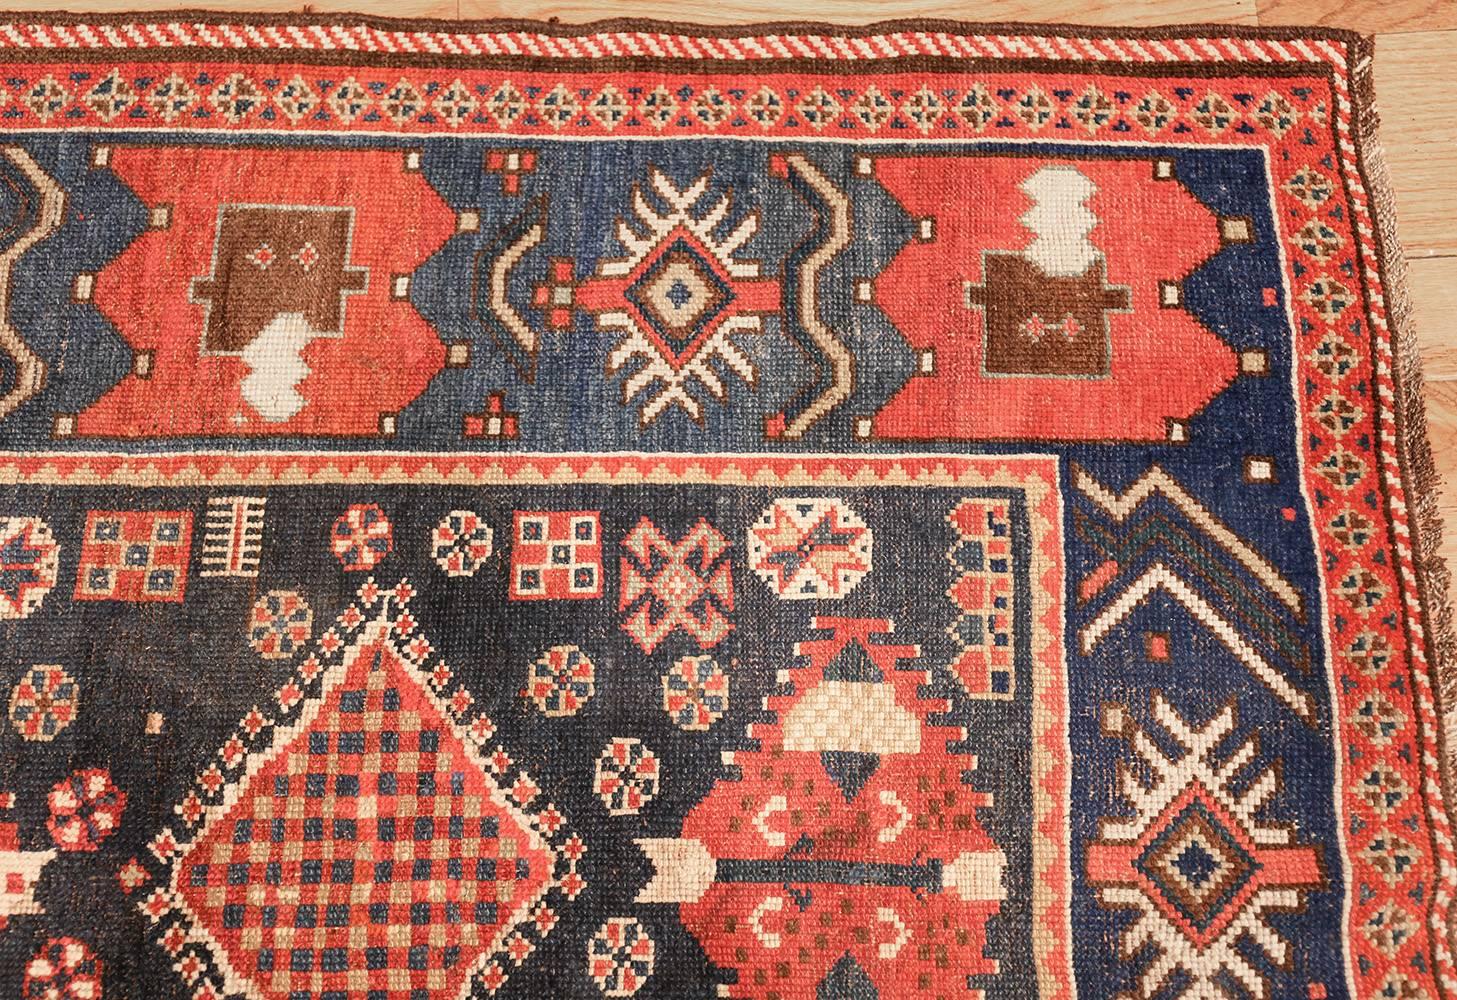 Antique Caucasian Kazak rug, country of origin: Caucasus, circa date: Early 20th century. This striking blue and red Caucasian Kazak rug features vibrant colors and carefully exact stitches that delineate the designs. The piece is mostly symmetrical